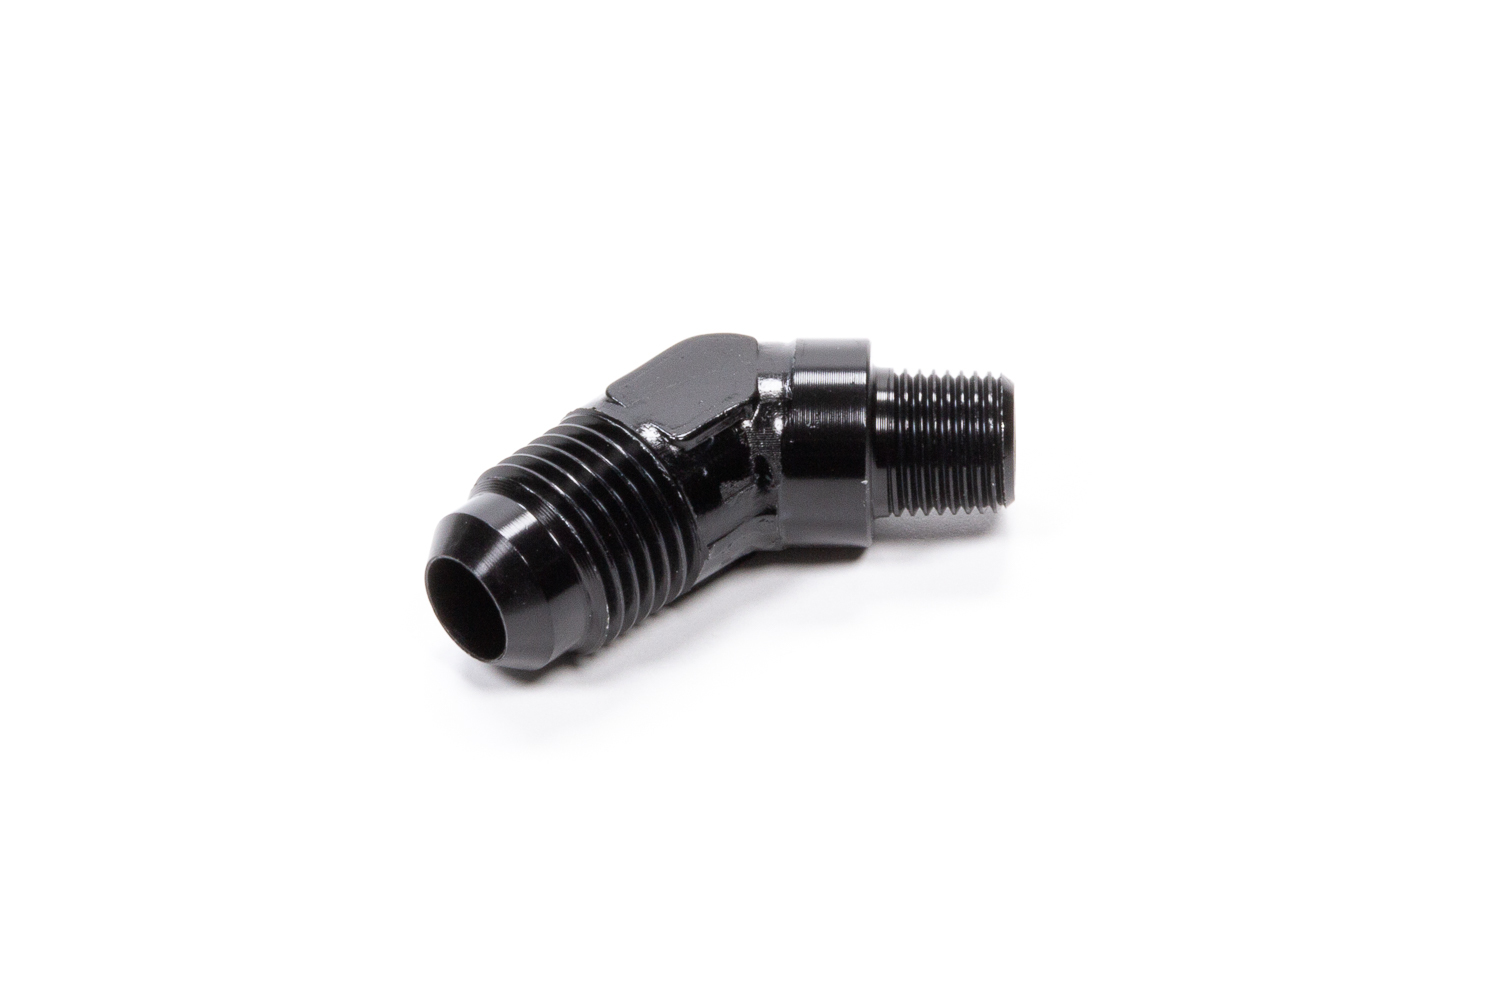 Fragola 482362-BL Fitting, Adapter, 45 Degree, 6 AN Male to 1/8 in NPT Male, Aluminum, Black Anodized, Each